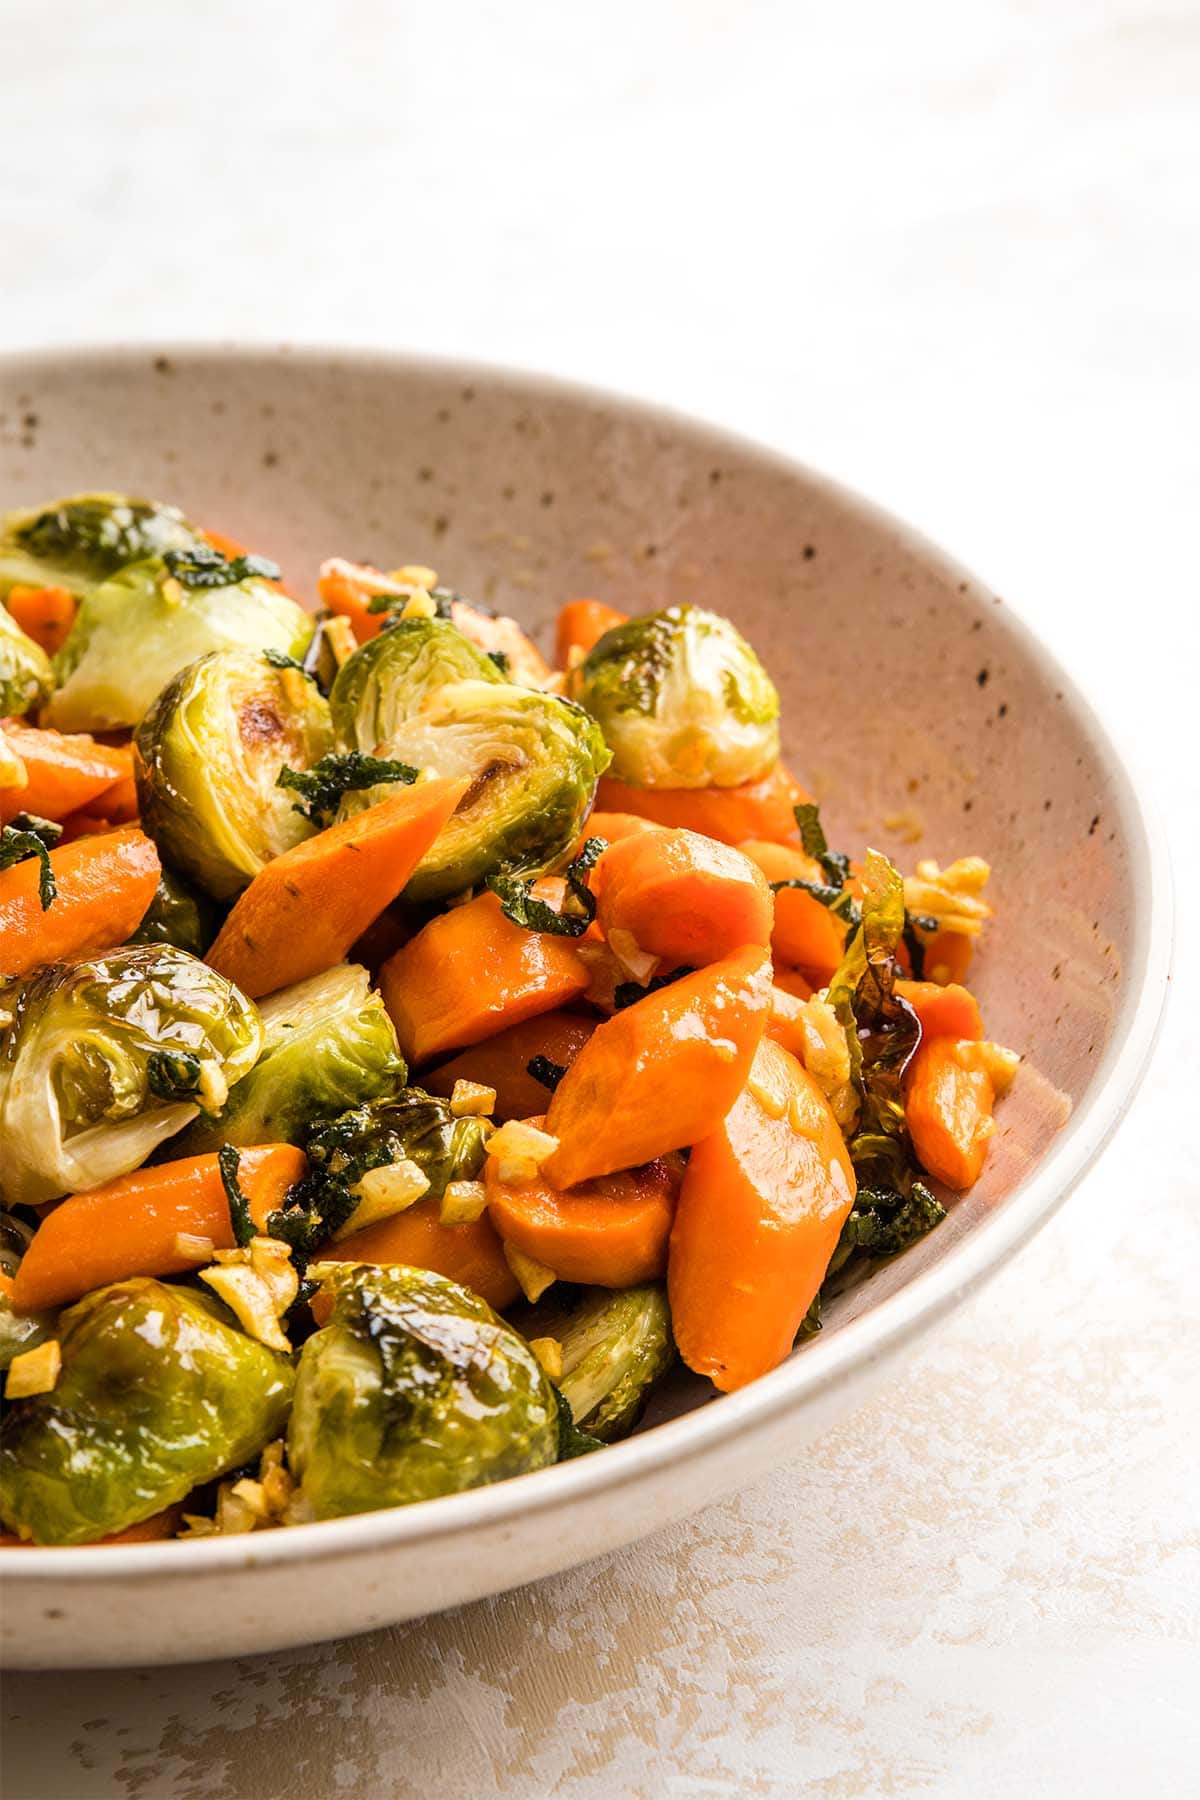 Roasted Brussels sprouts and carrots tossed with brown butter sage in a beige speckled bowl.